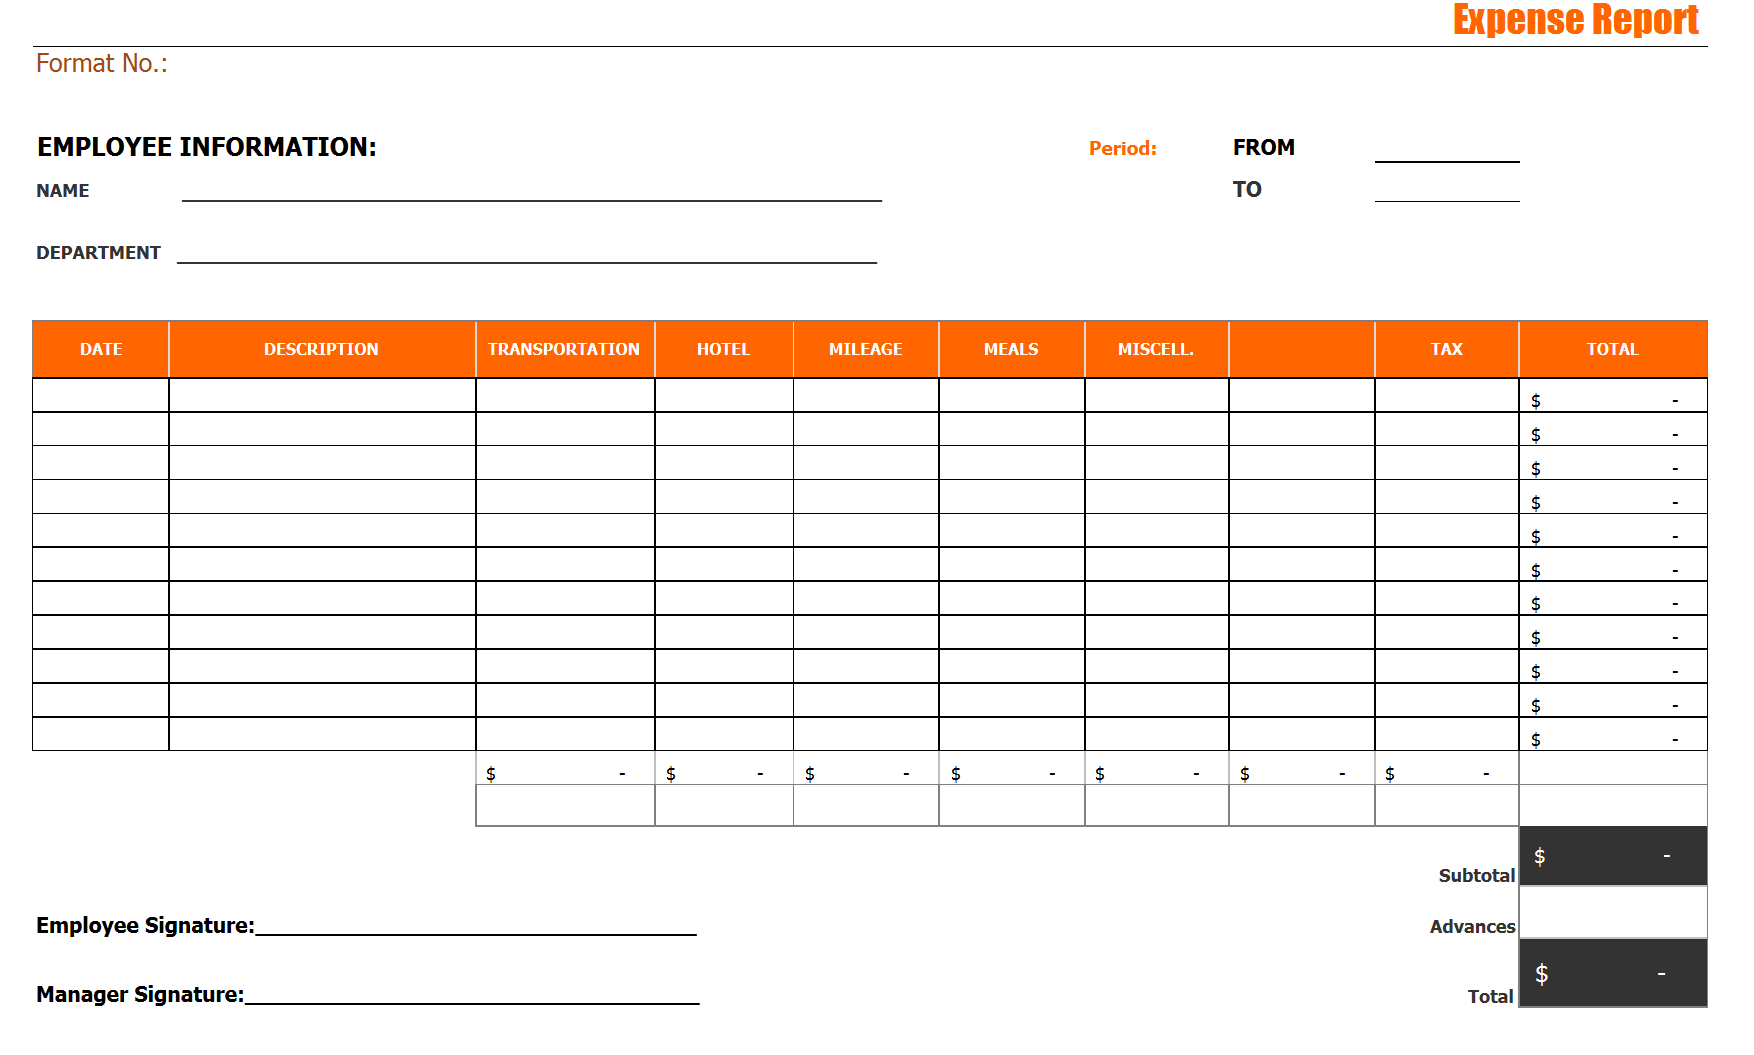 daily personal expense log spreadsheet template excel